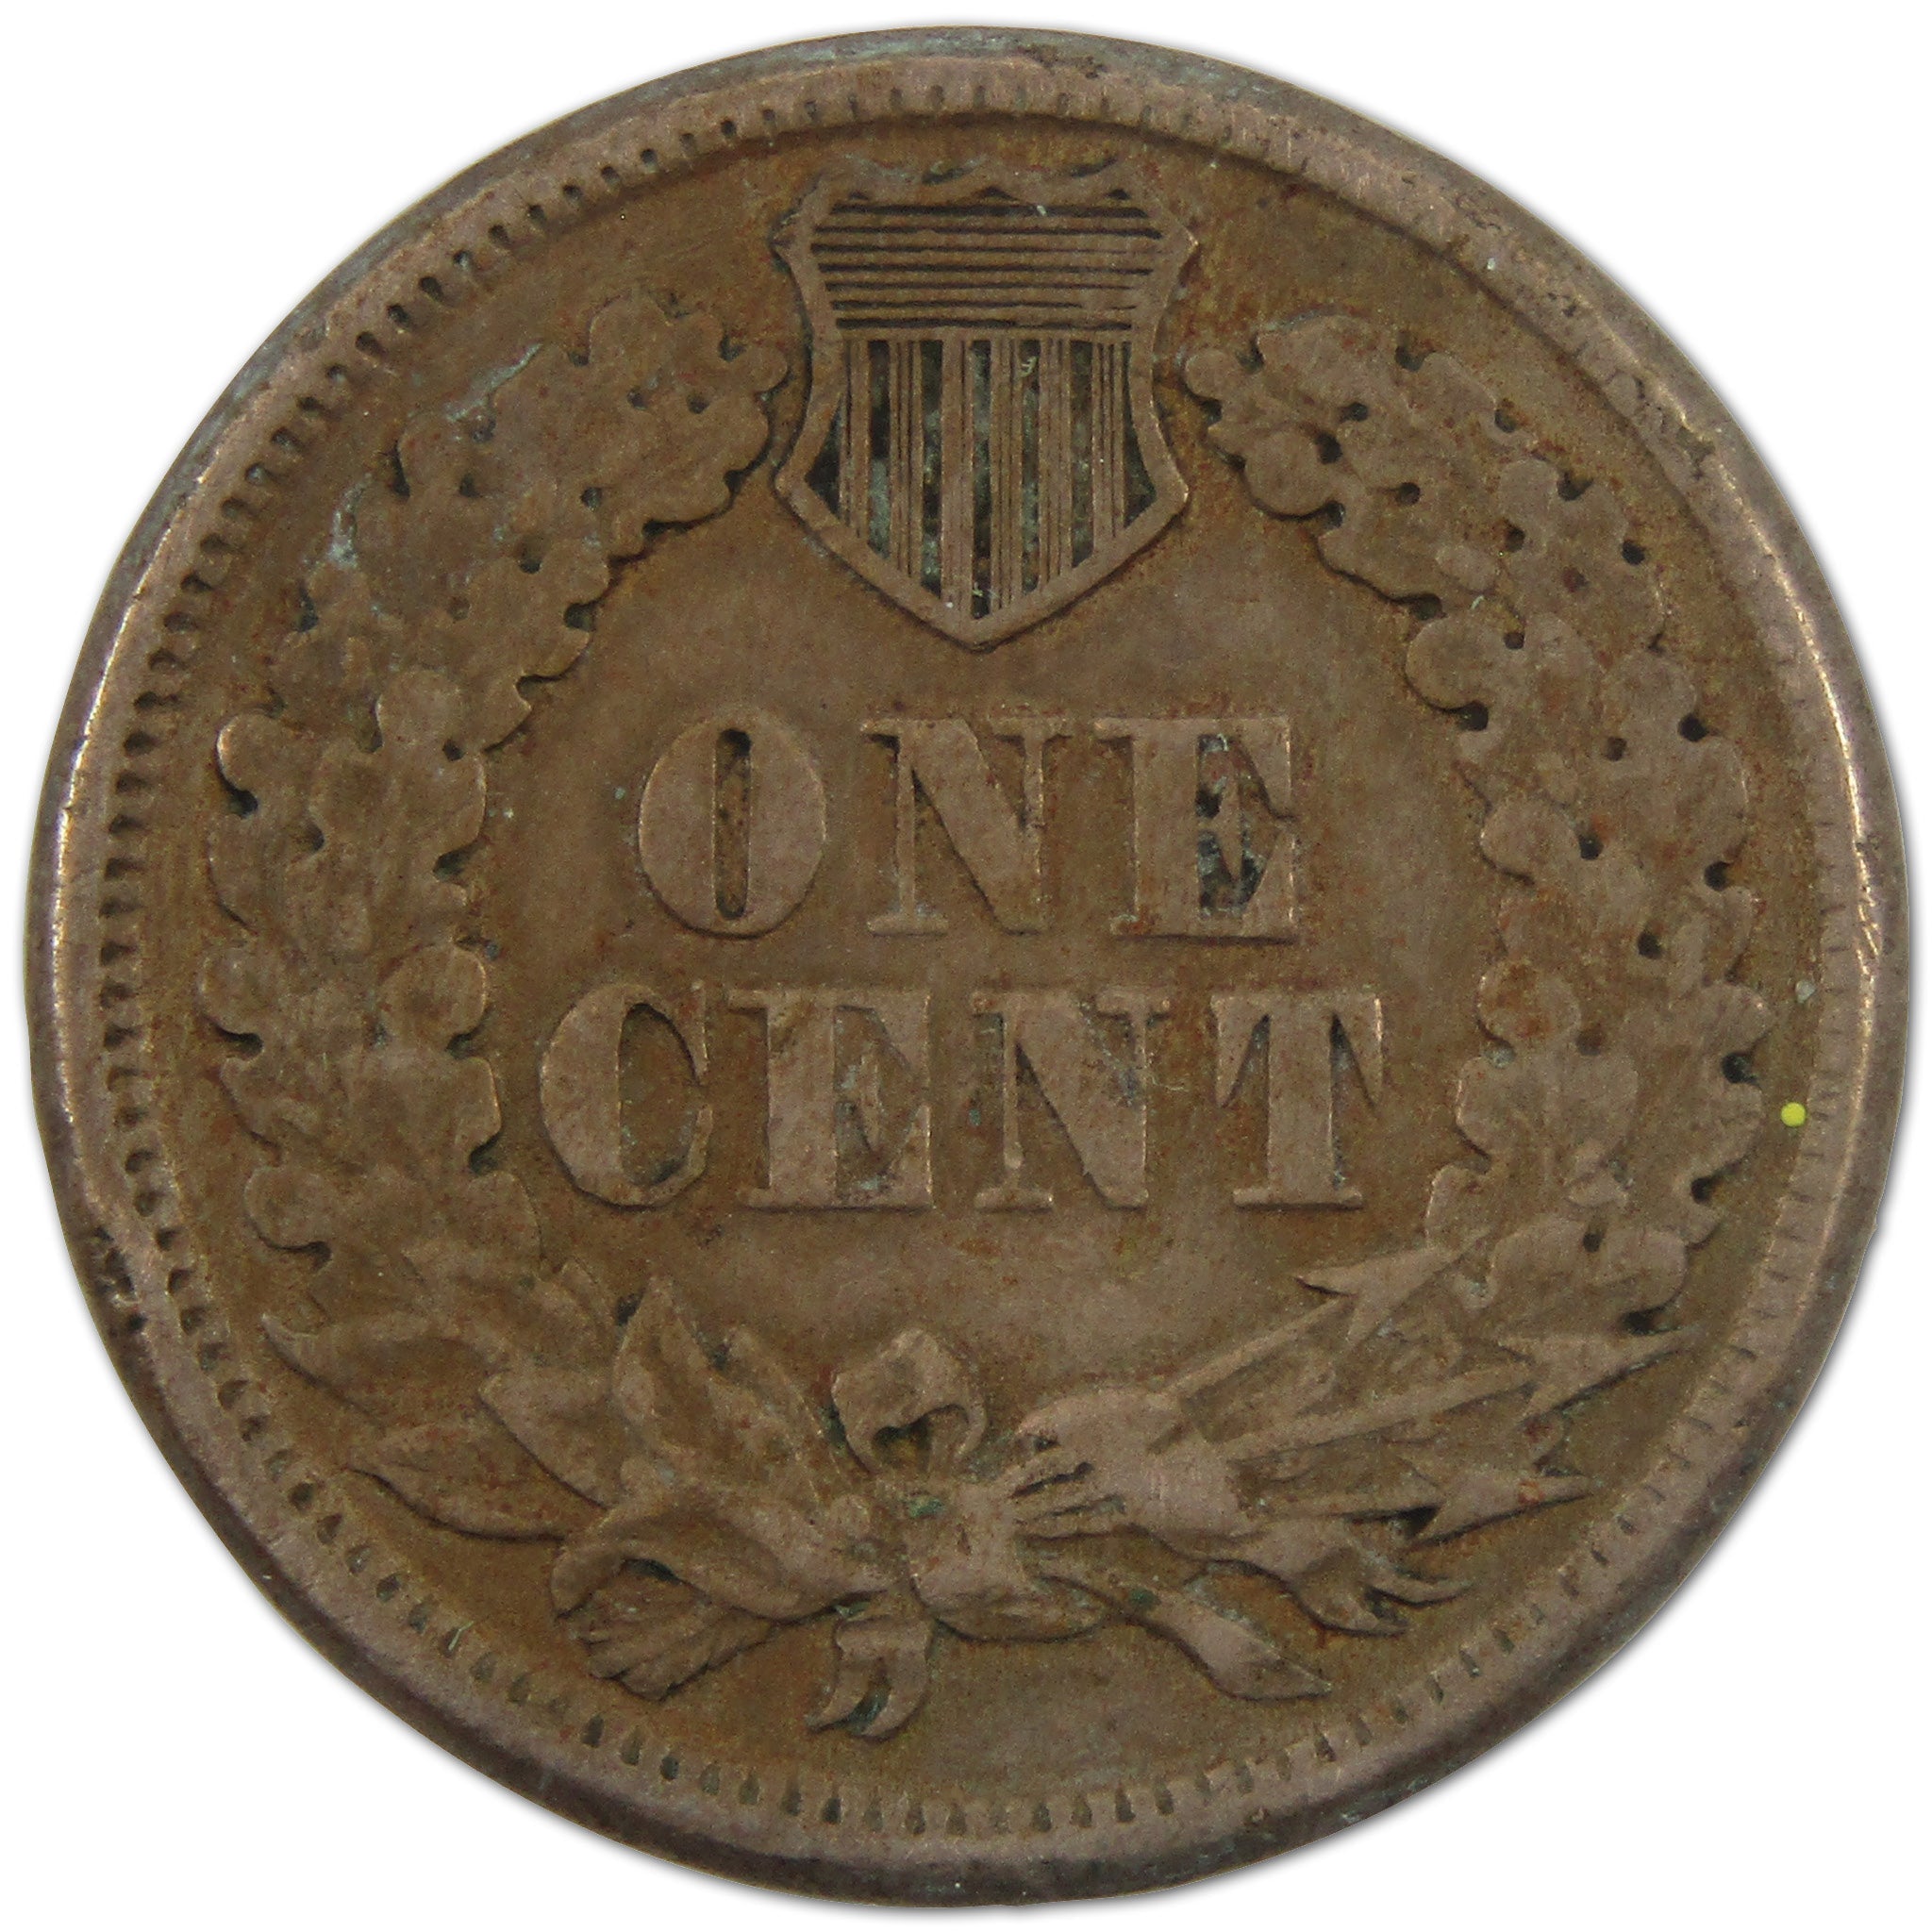 1860 Indian Head Cent XF EF Extremely Fine Copper-Nickel 1c SKU:I10530